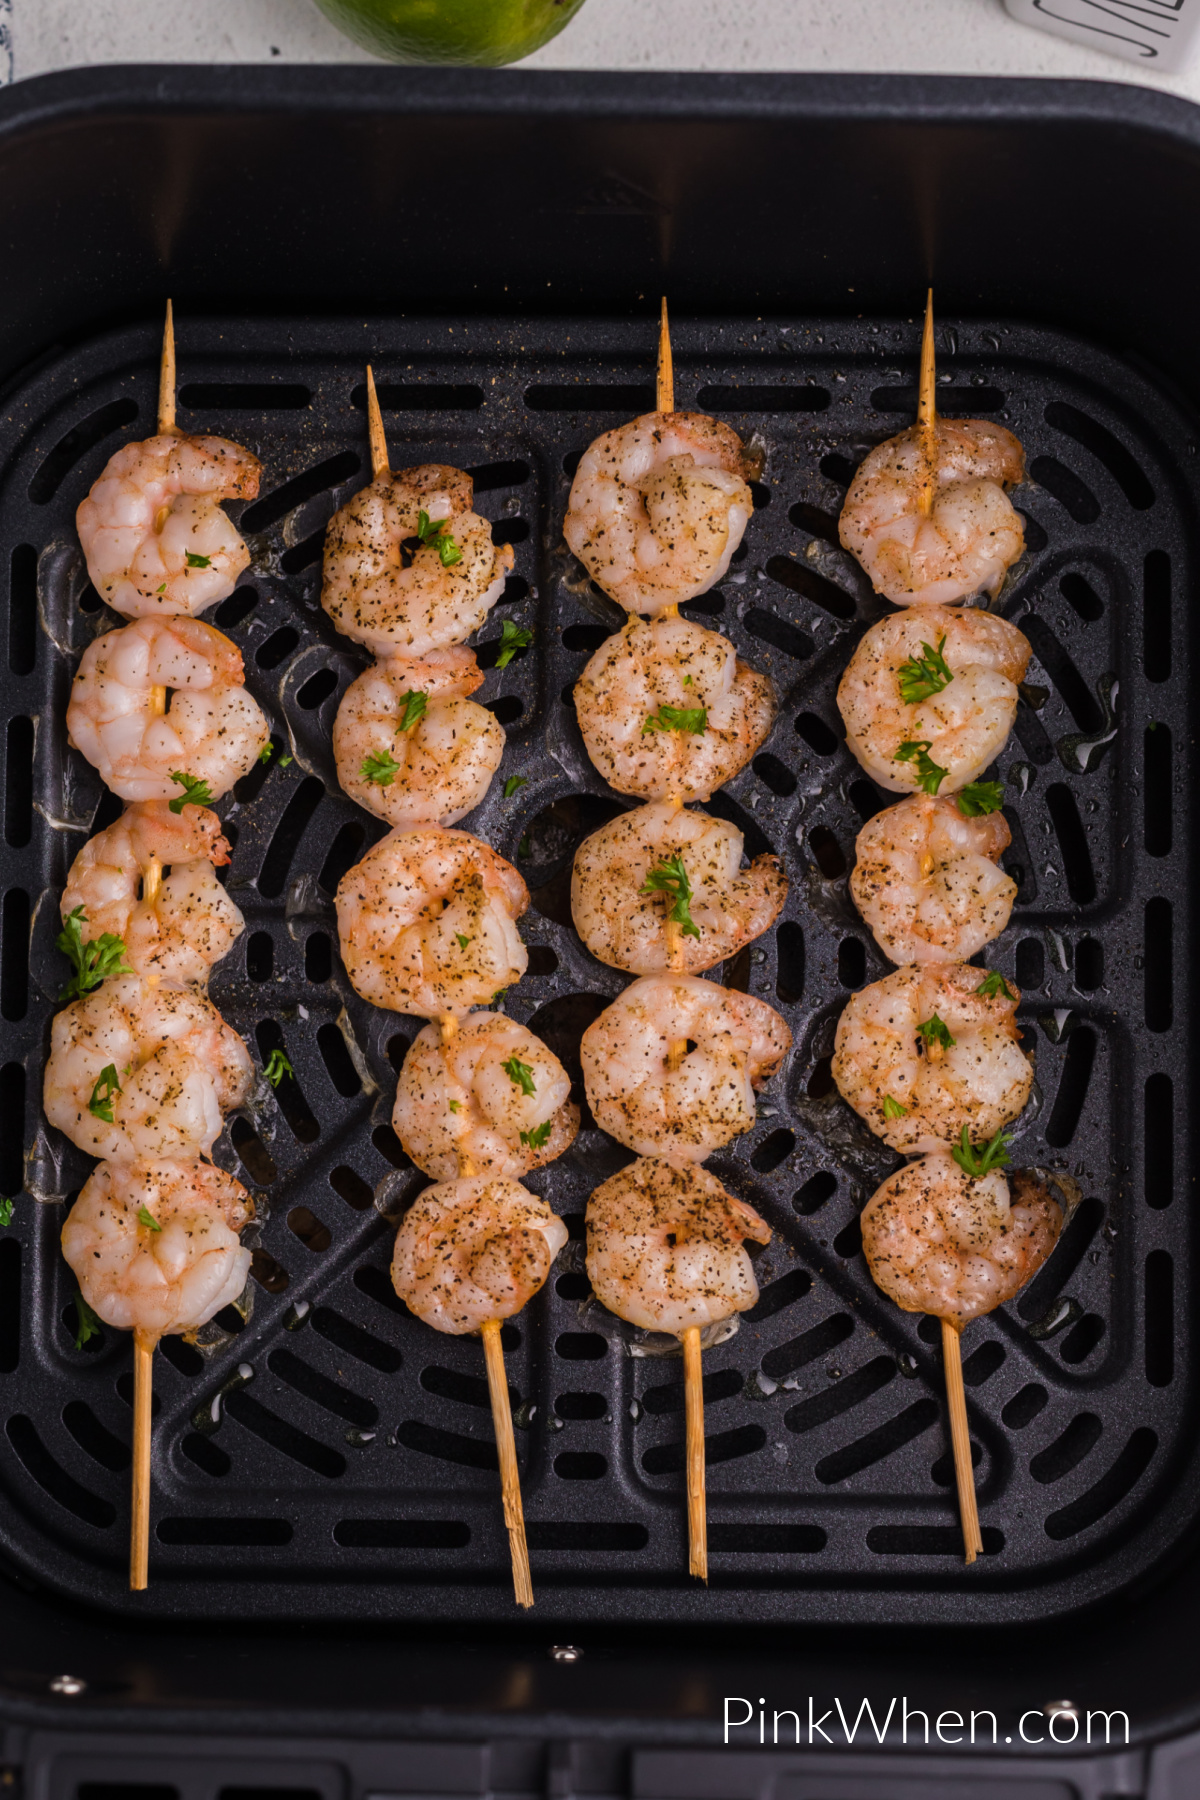 Shrimp skewers in the air fryer basket, ready to be served.